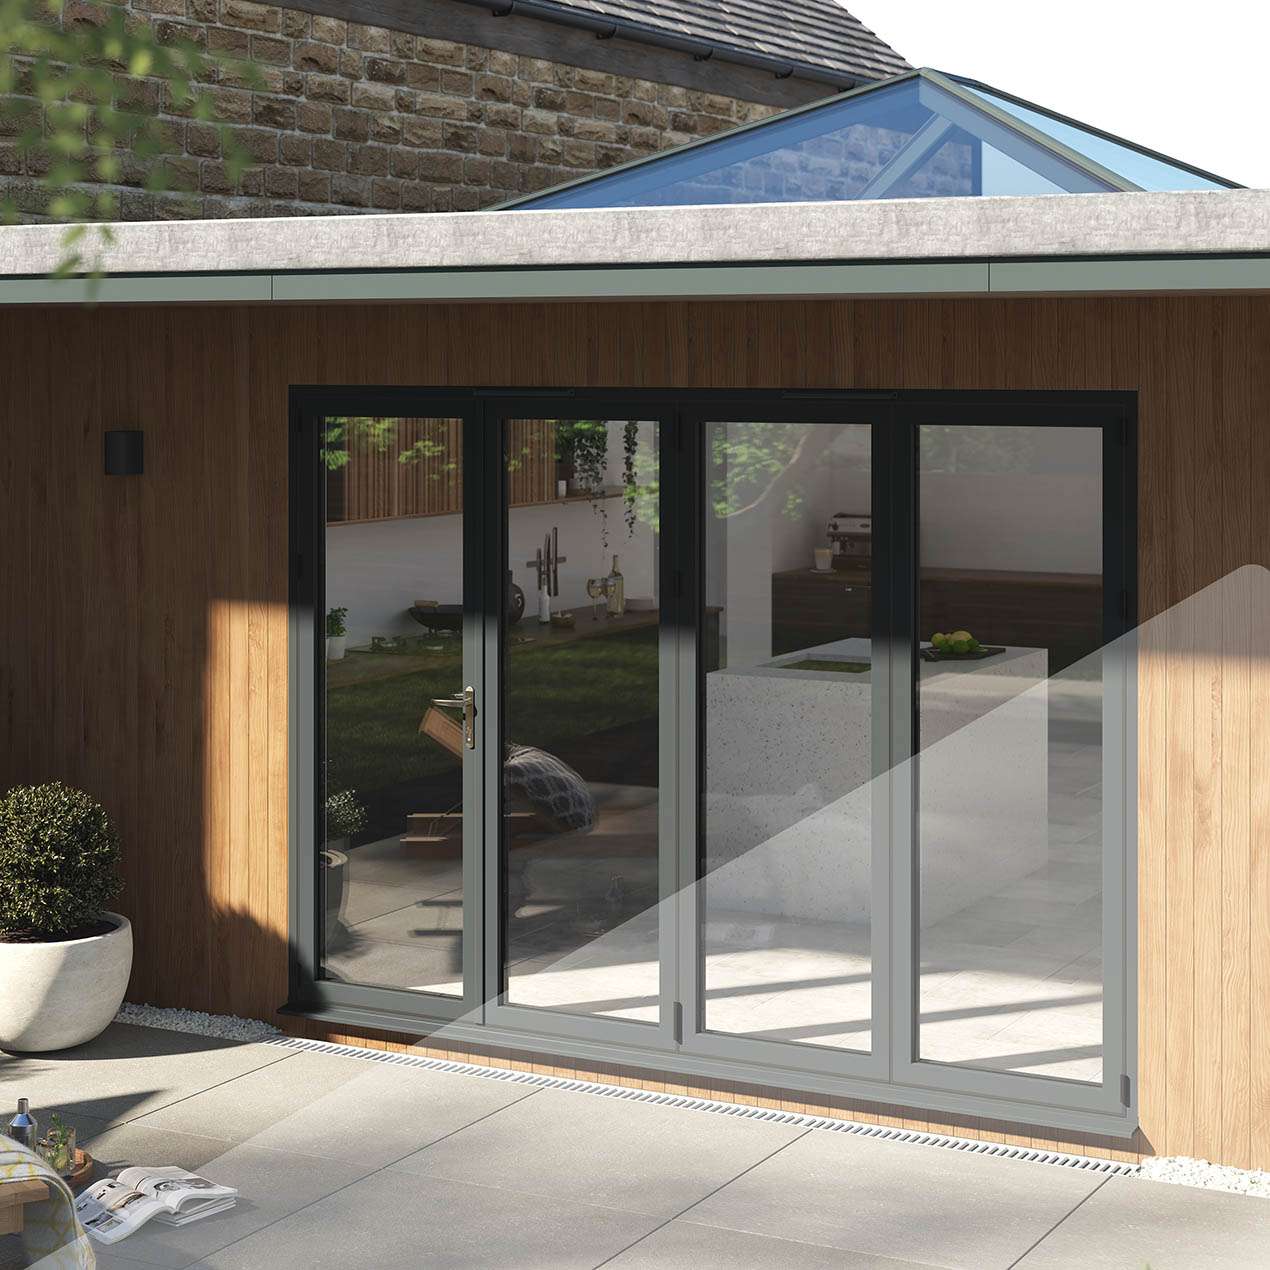 Exterior view of a wooden panelled flat roof extension with a set of grey Korniche bi-folding doors and a Korniche rood lantern installed.The patio outside has a plant pot situated to the left of the doors and in the bottom left corner a cocktail and an open book are visible on the ground.